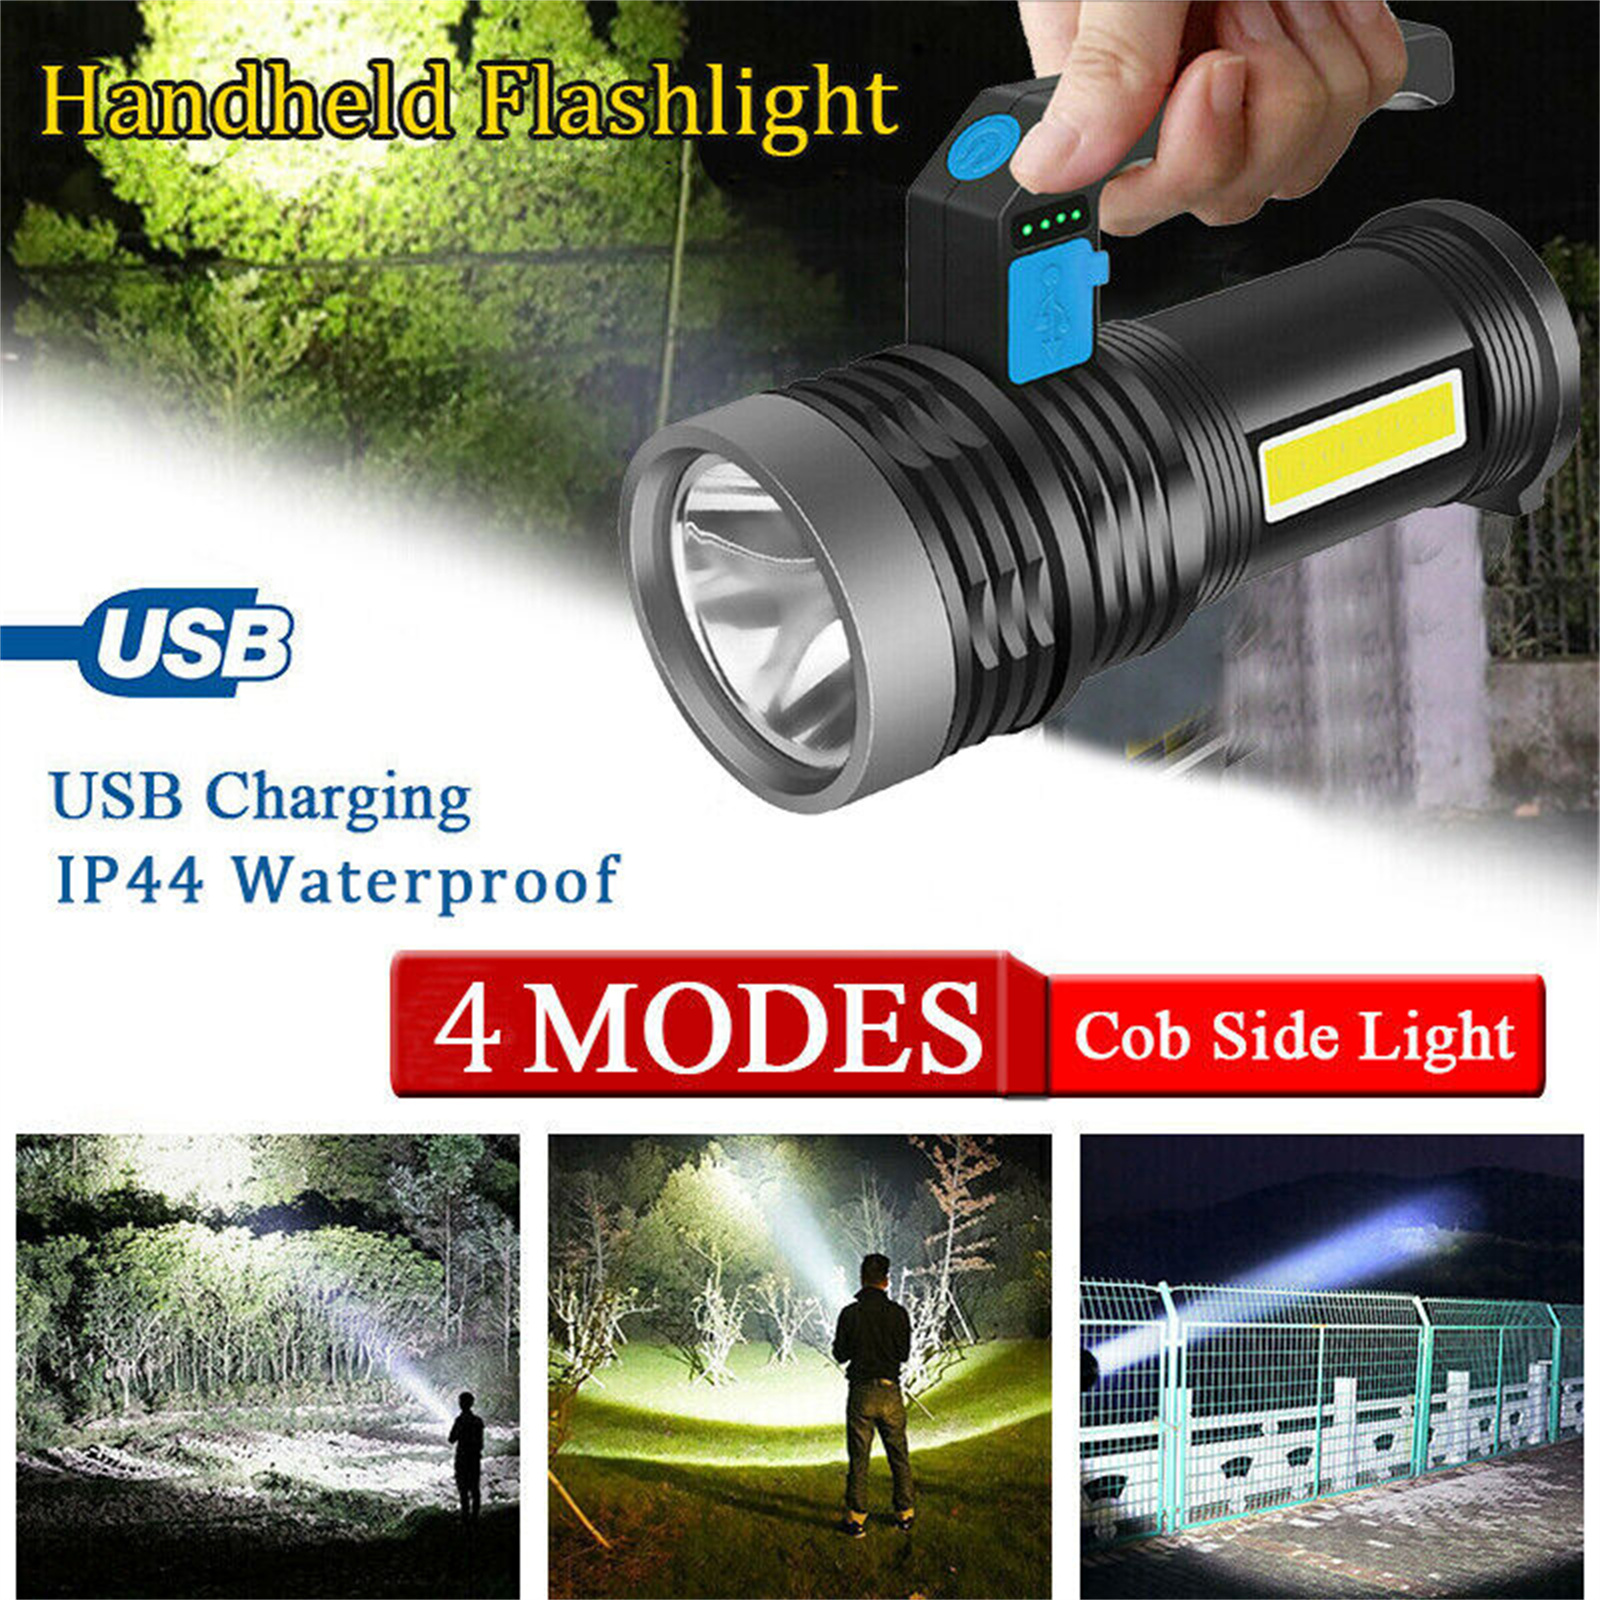 LED Outdoor Mini Flashlight With Handle 1000LM Super Bright USB Rechargeable Searchlight For Camping Emergencies Hiking